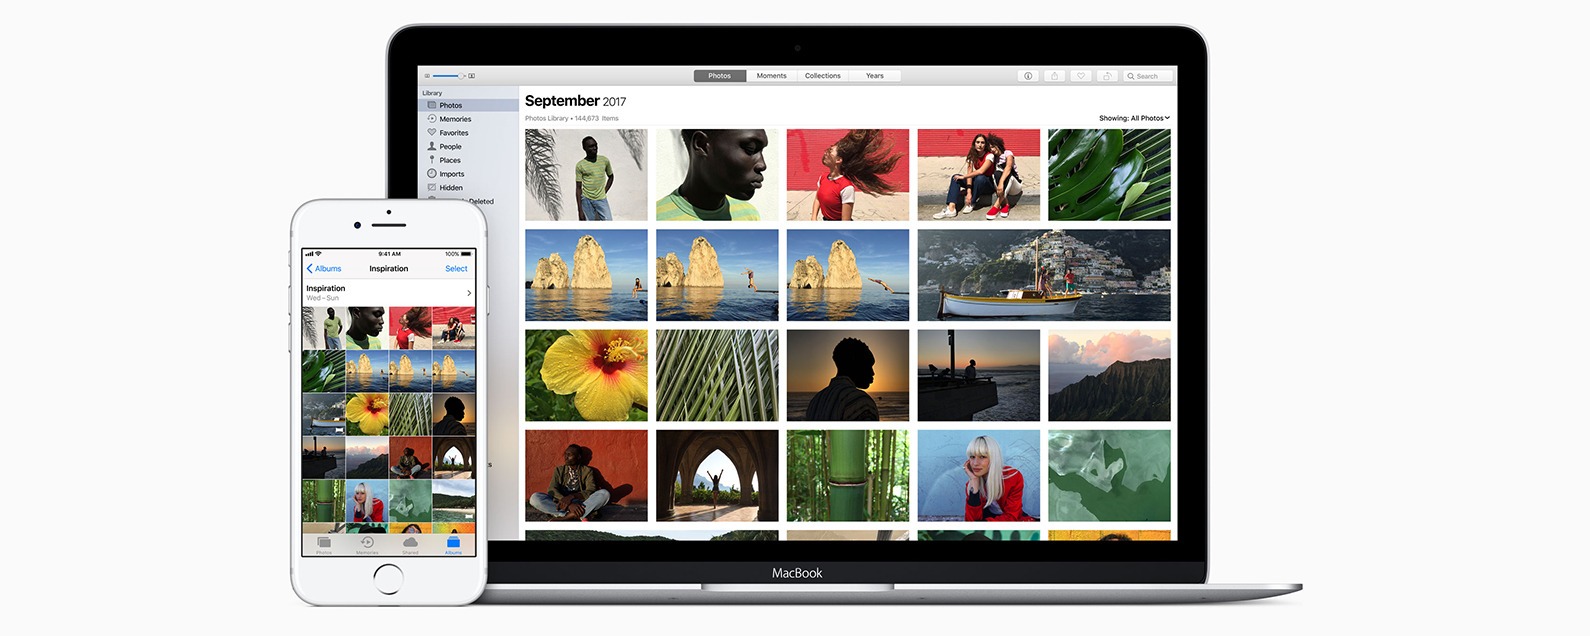 Download Photos To Icloud From Mac